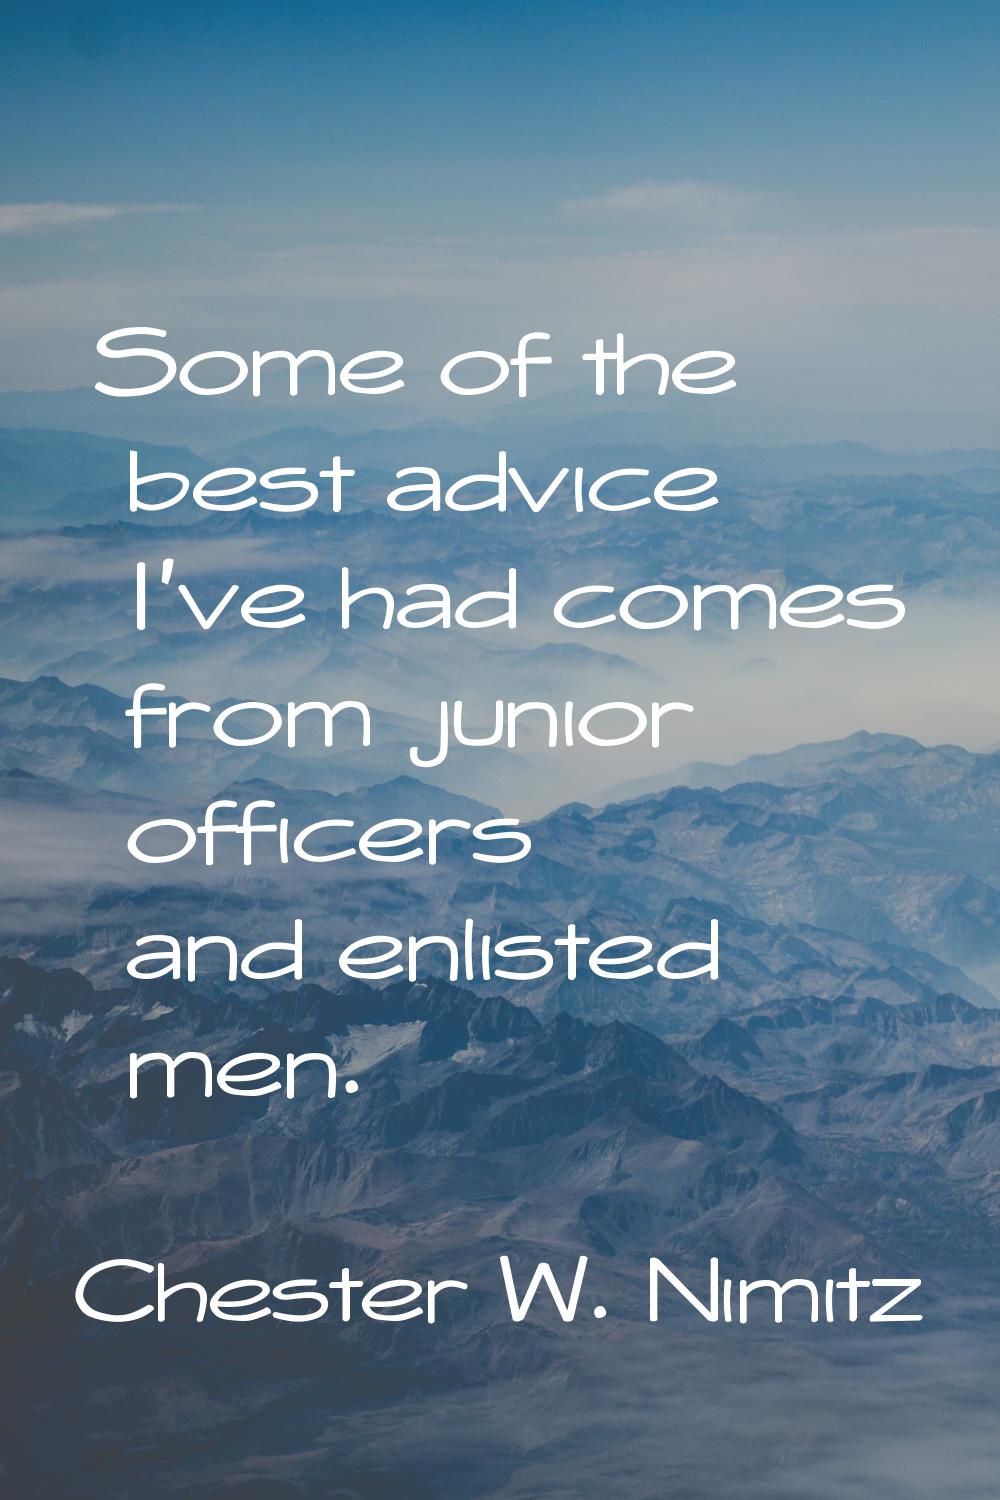 Some of the best advice I've had comes from junior officers and enlisted men.